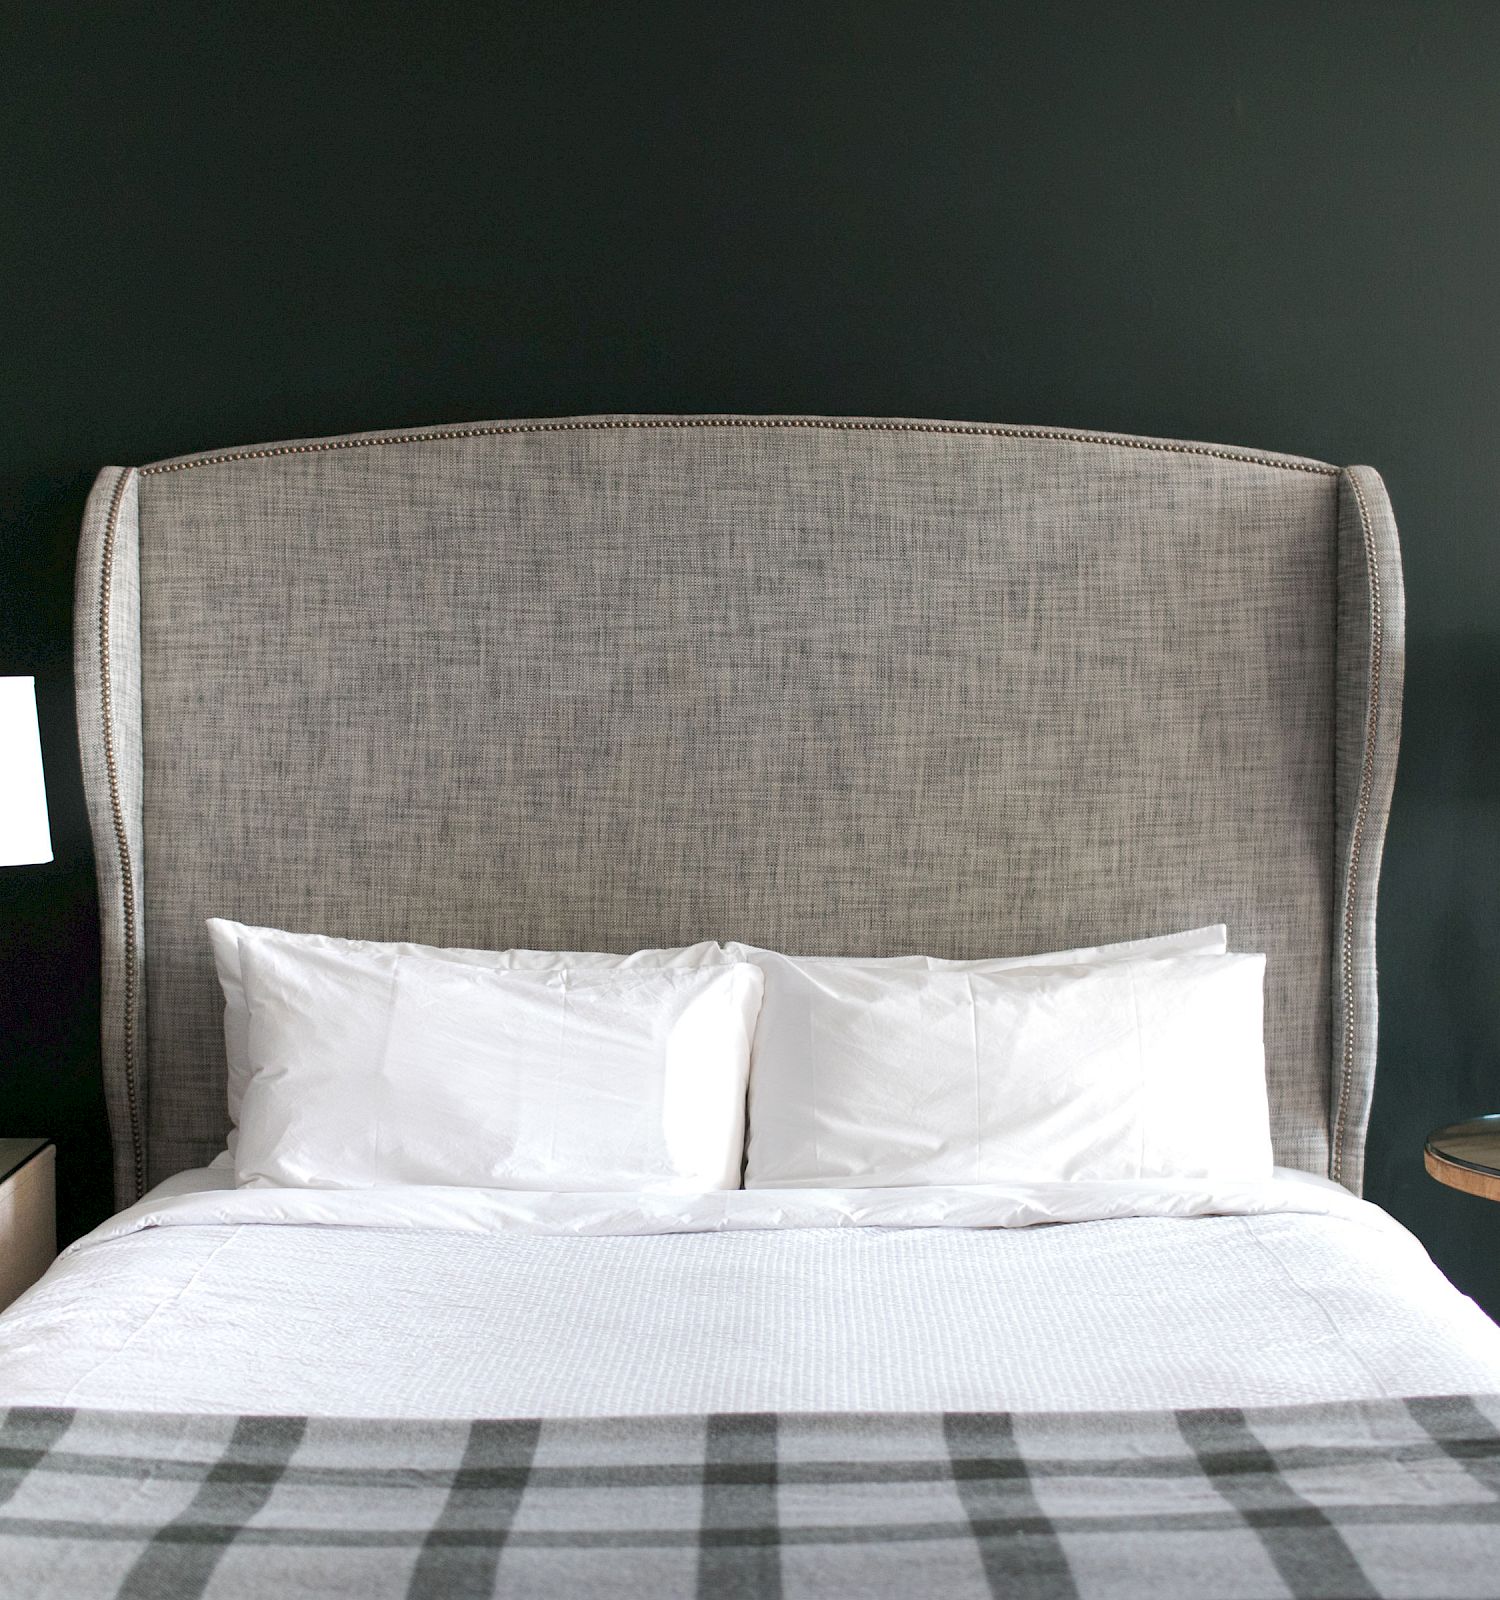 A neatly made bed with a large padded headboard, flanked by two bedside tables each with a lamp, a small clock, and a green decorative item.